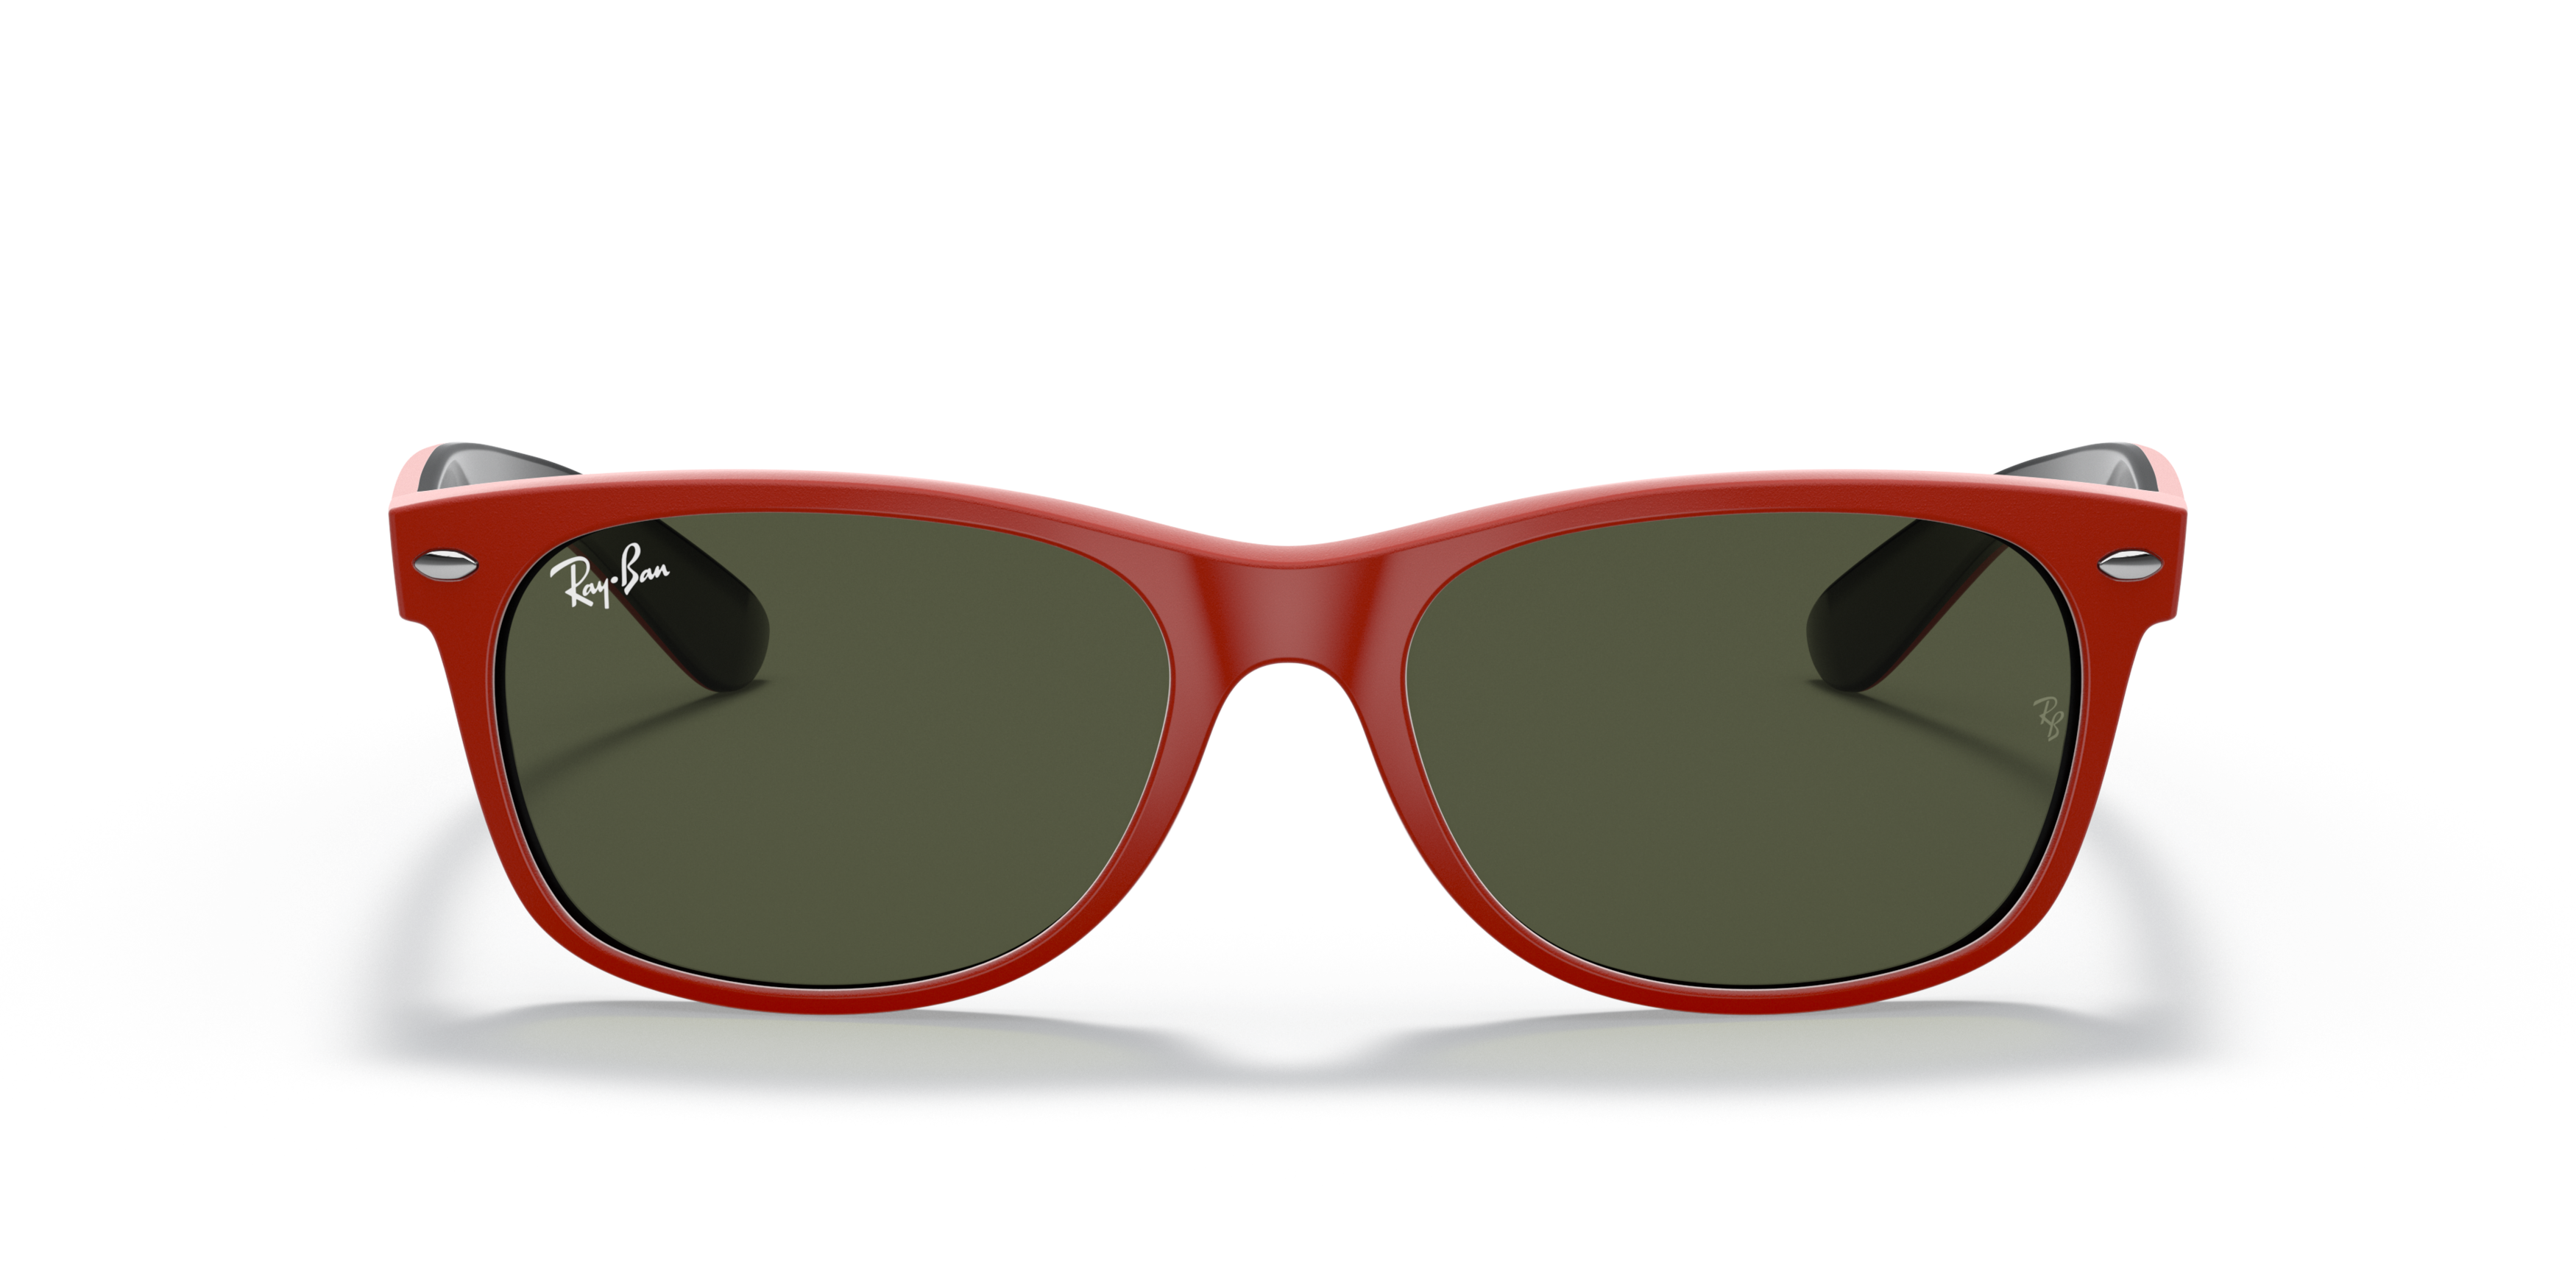 [products.image.front] Ray-Ban New Wayfarer RB2132 646631